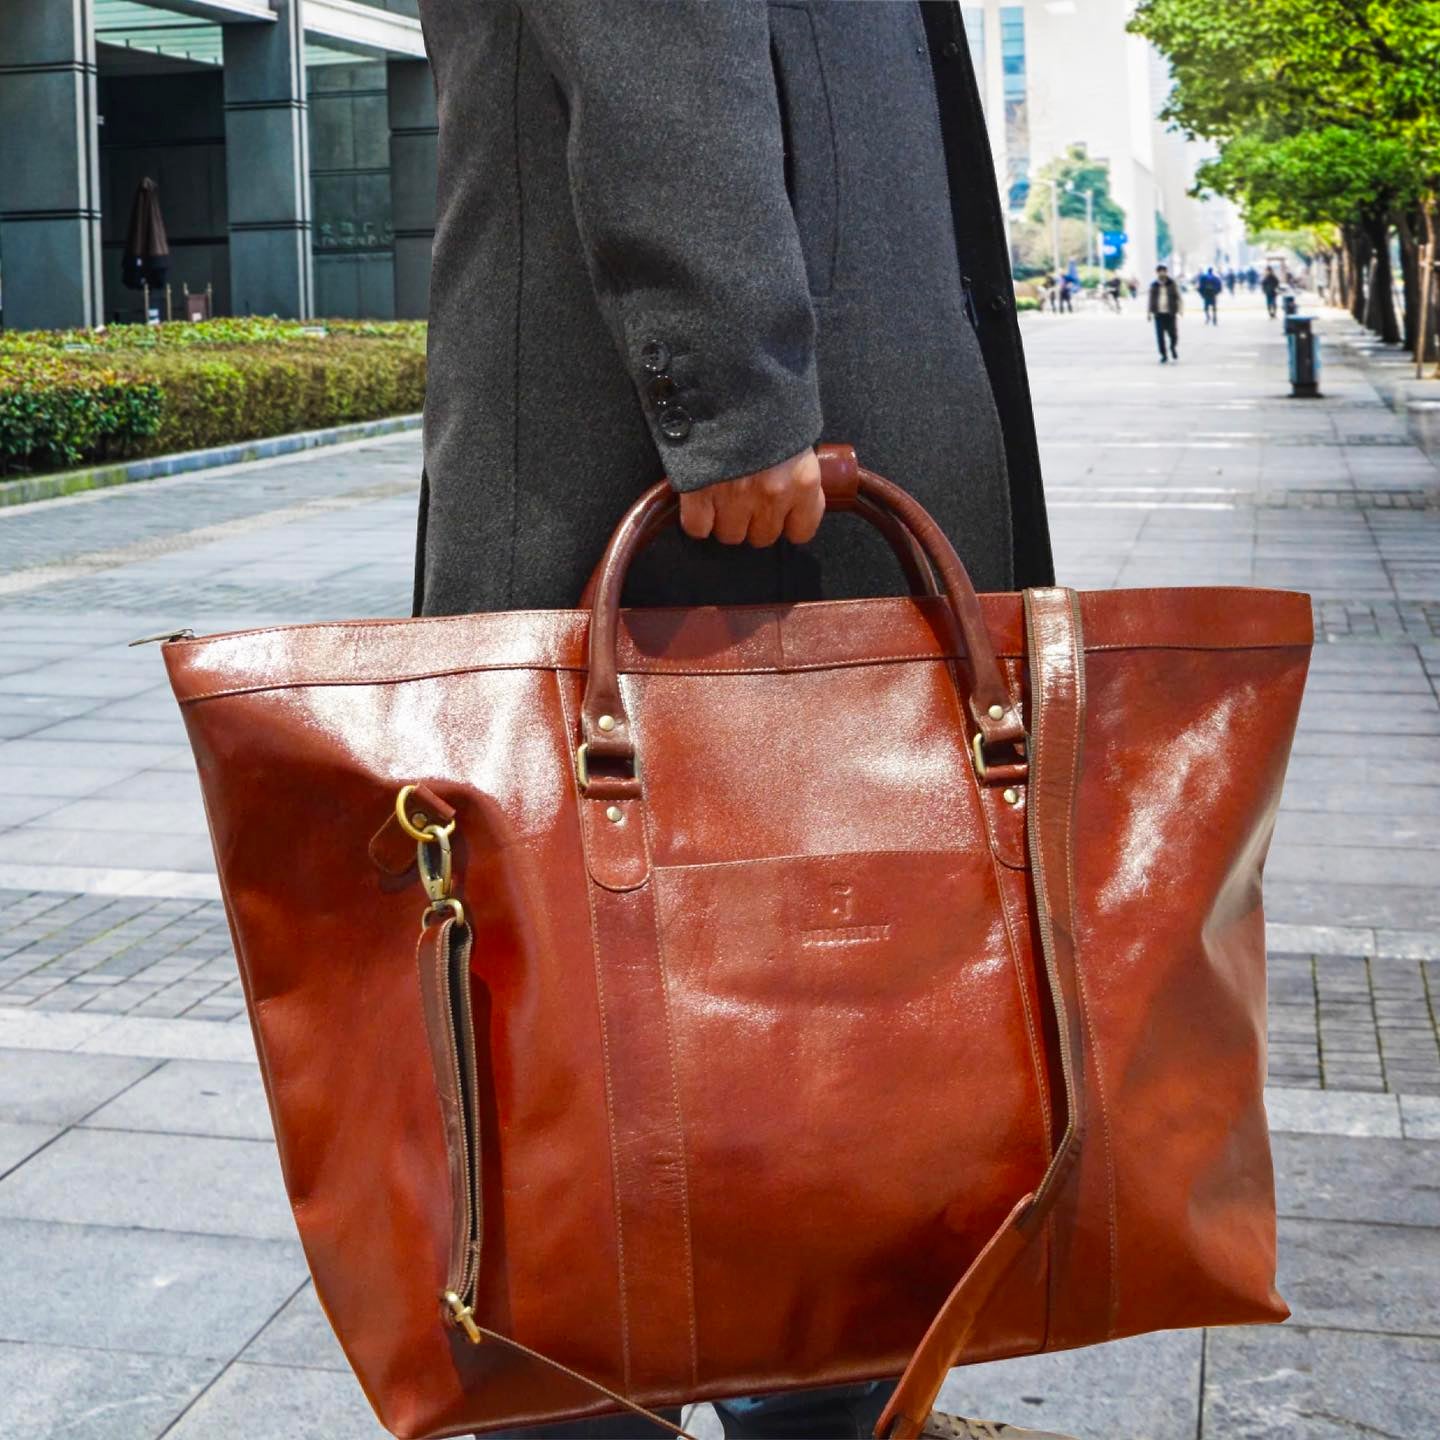 Large handmade chestnut full leather holdall made from full grain vegetable tanned cow leather. A luxury travel bag, perfect for weekend trips or longer.